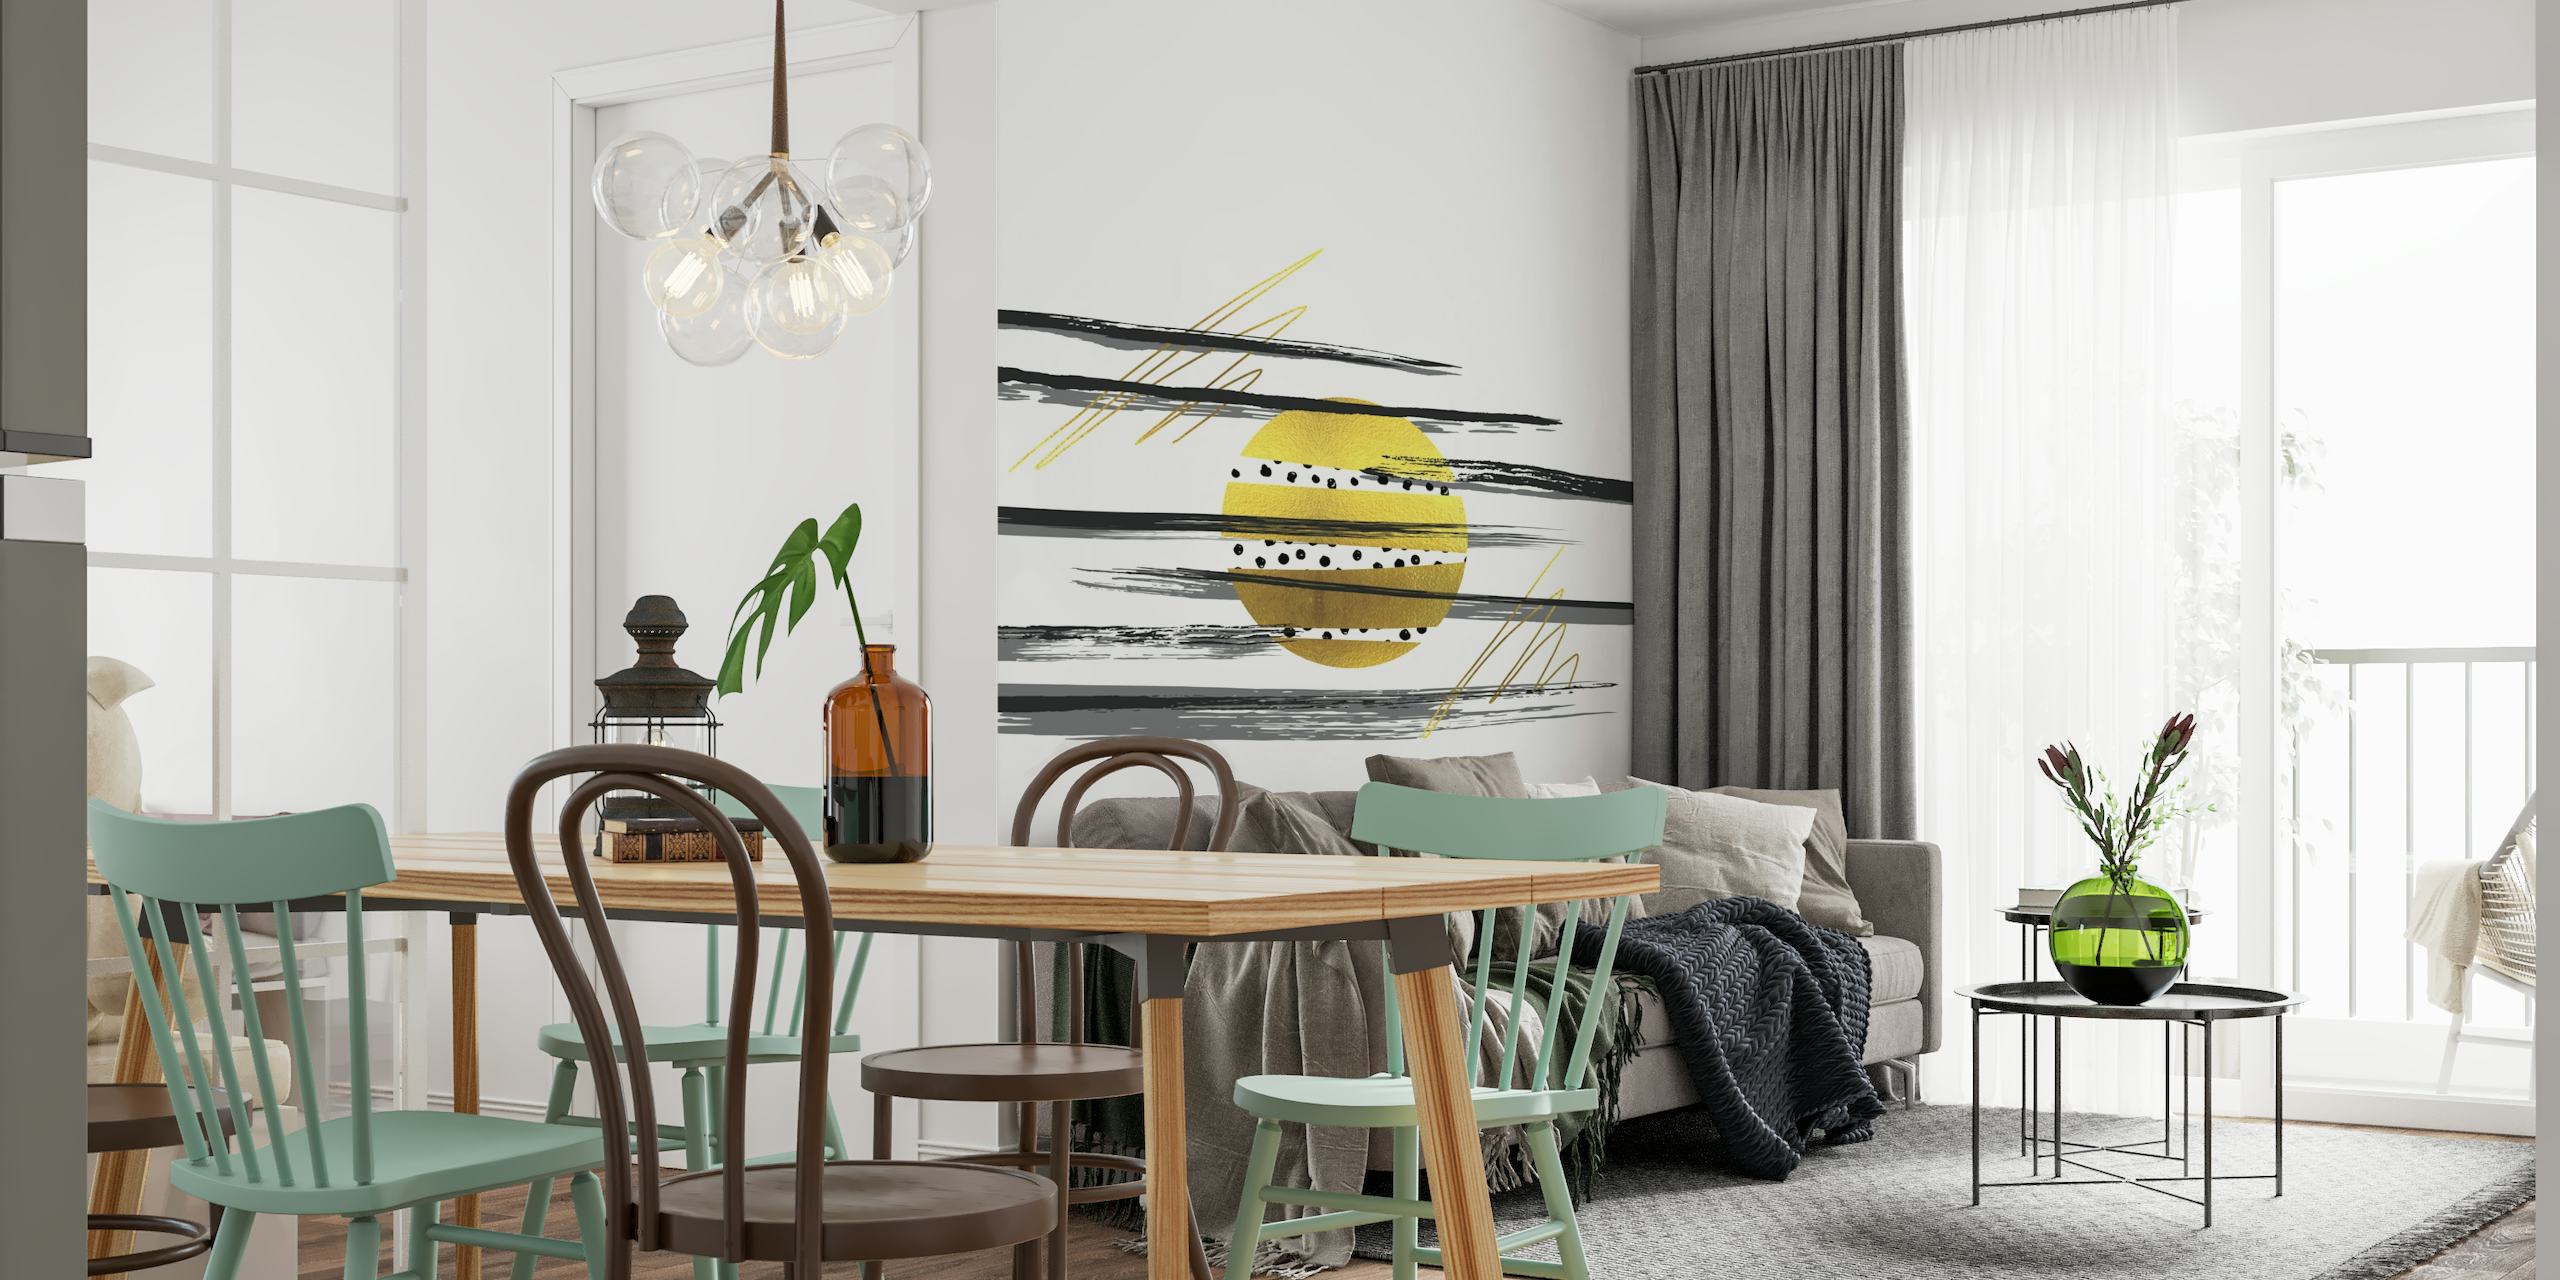 Abstract full moon wall mural with black and gold brush strokes on a white background